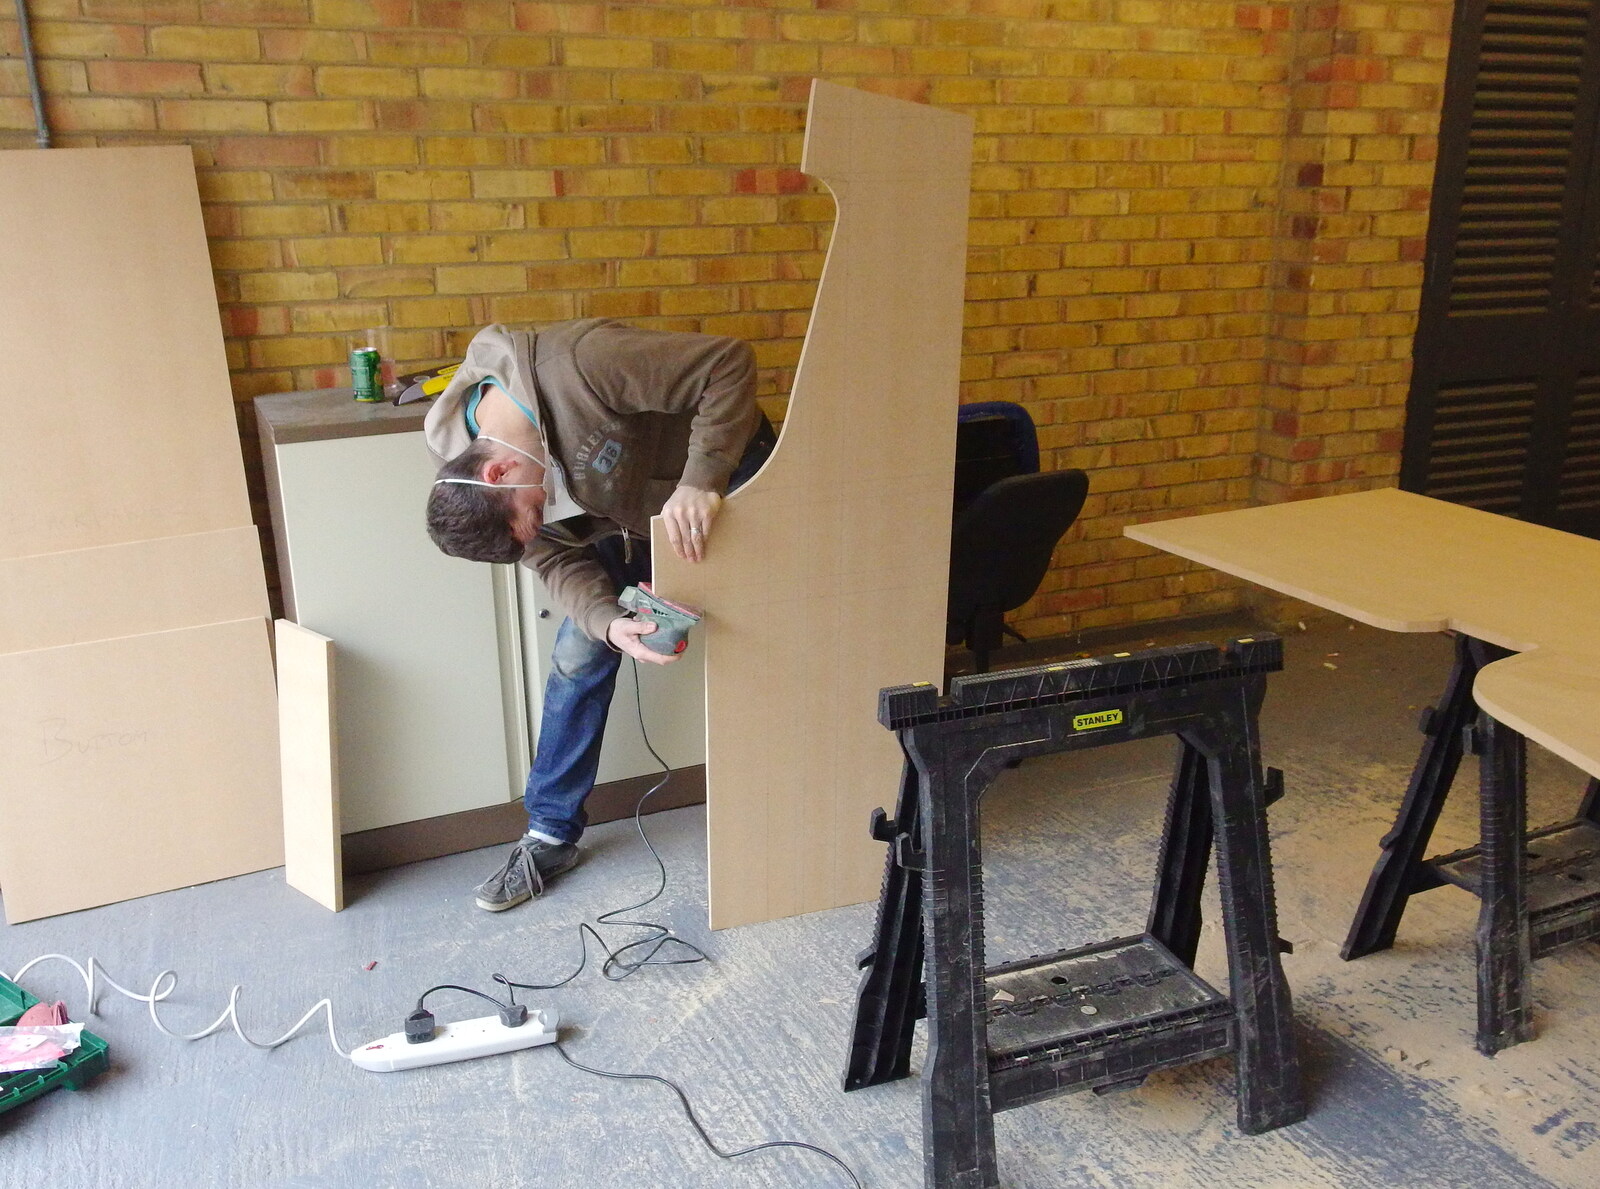 SwiftKey's Arcade Cabinet, and the Streets of Southwark, London - 5th December 2013: The MDF looks like a cabinet part now